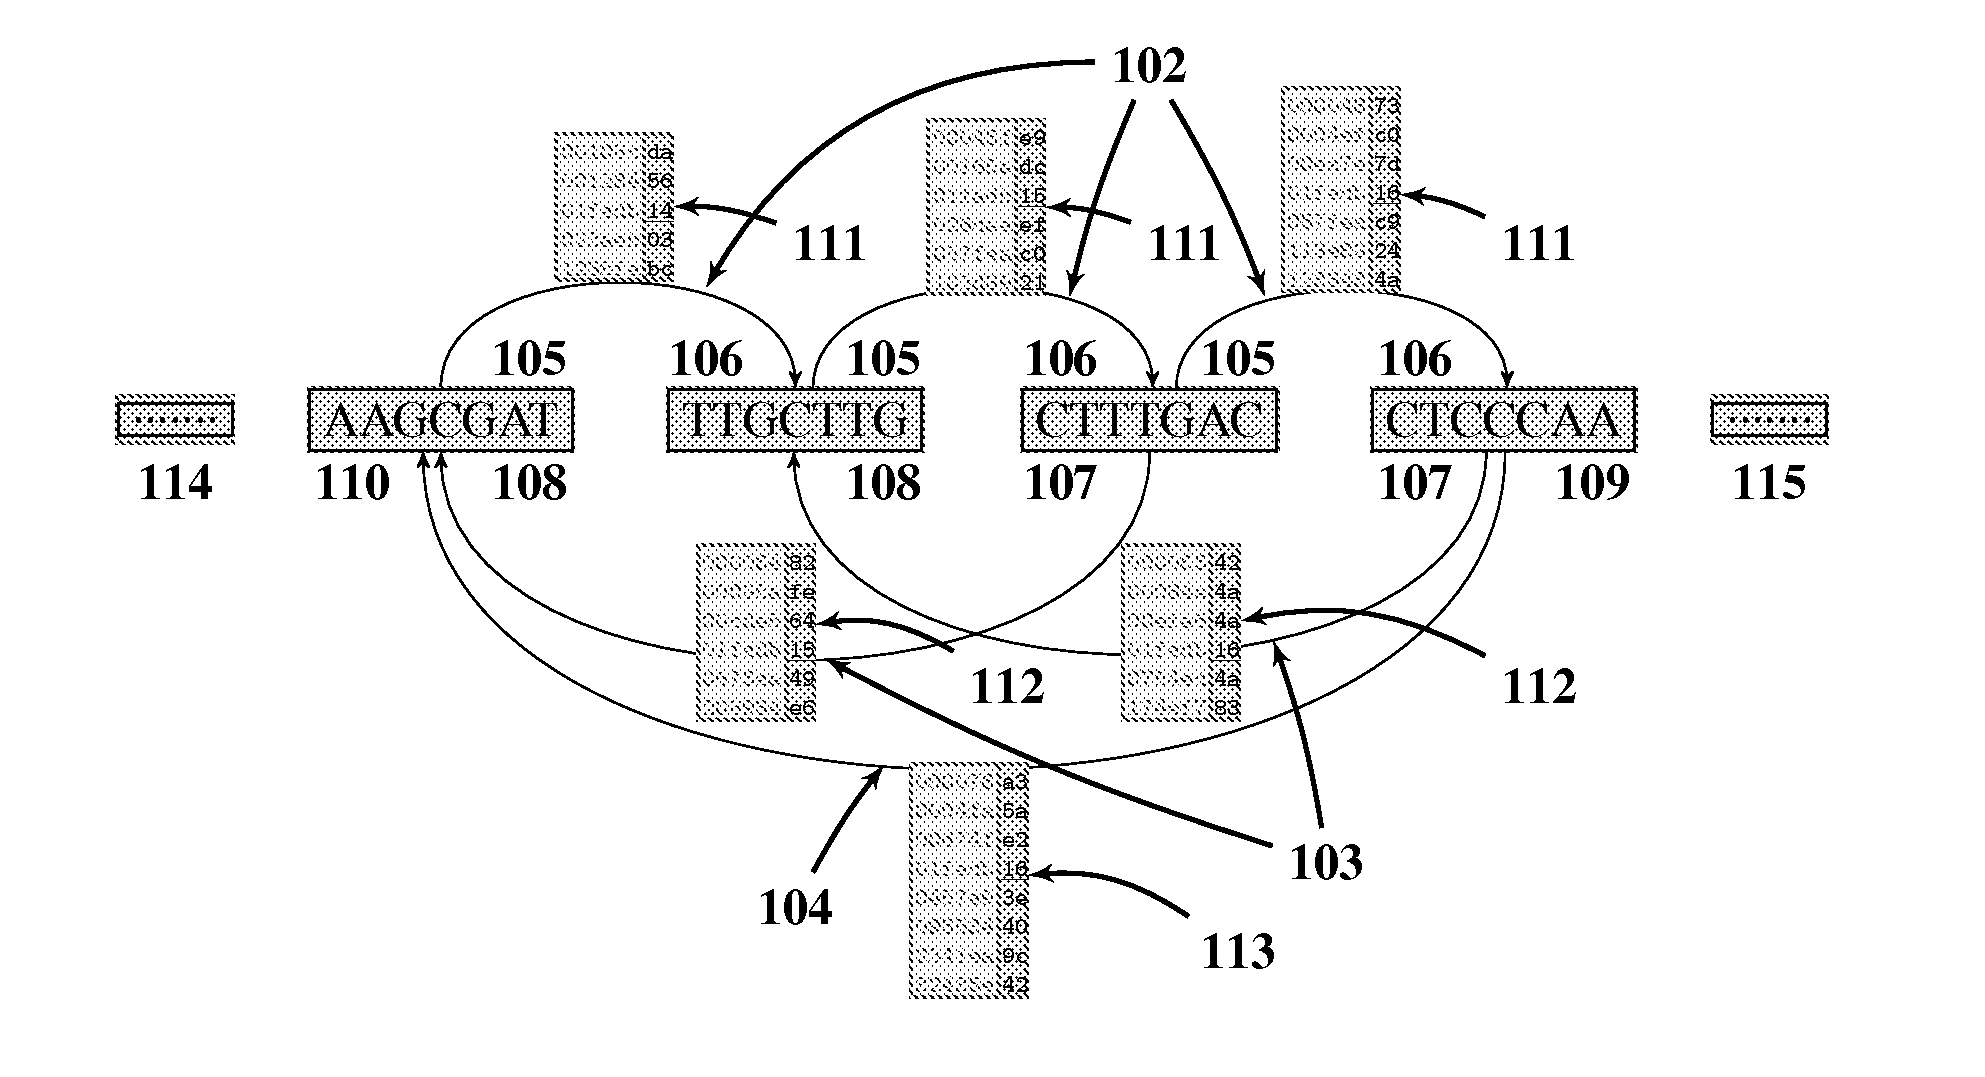 Method for rapid assessment of similarity between sequences